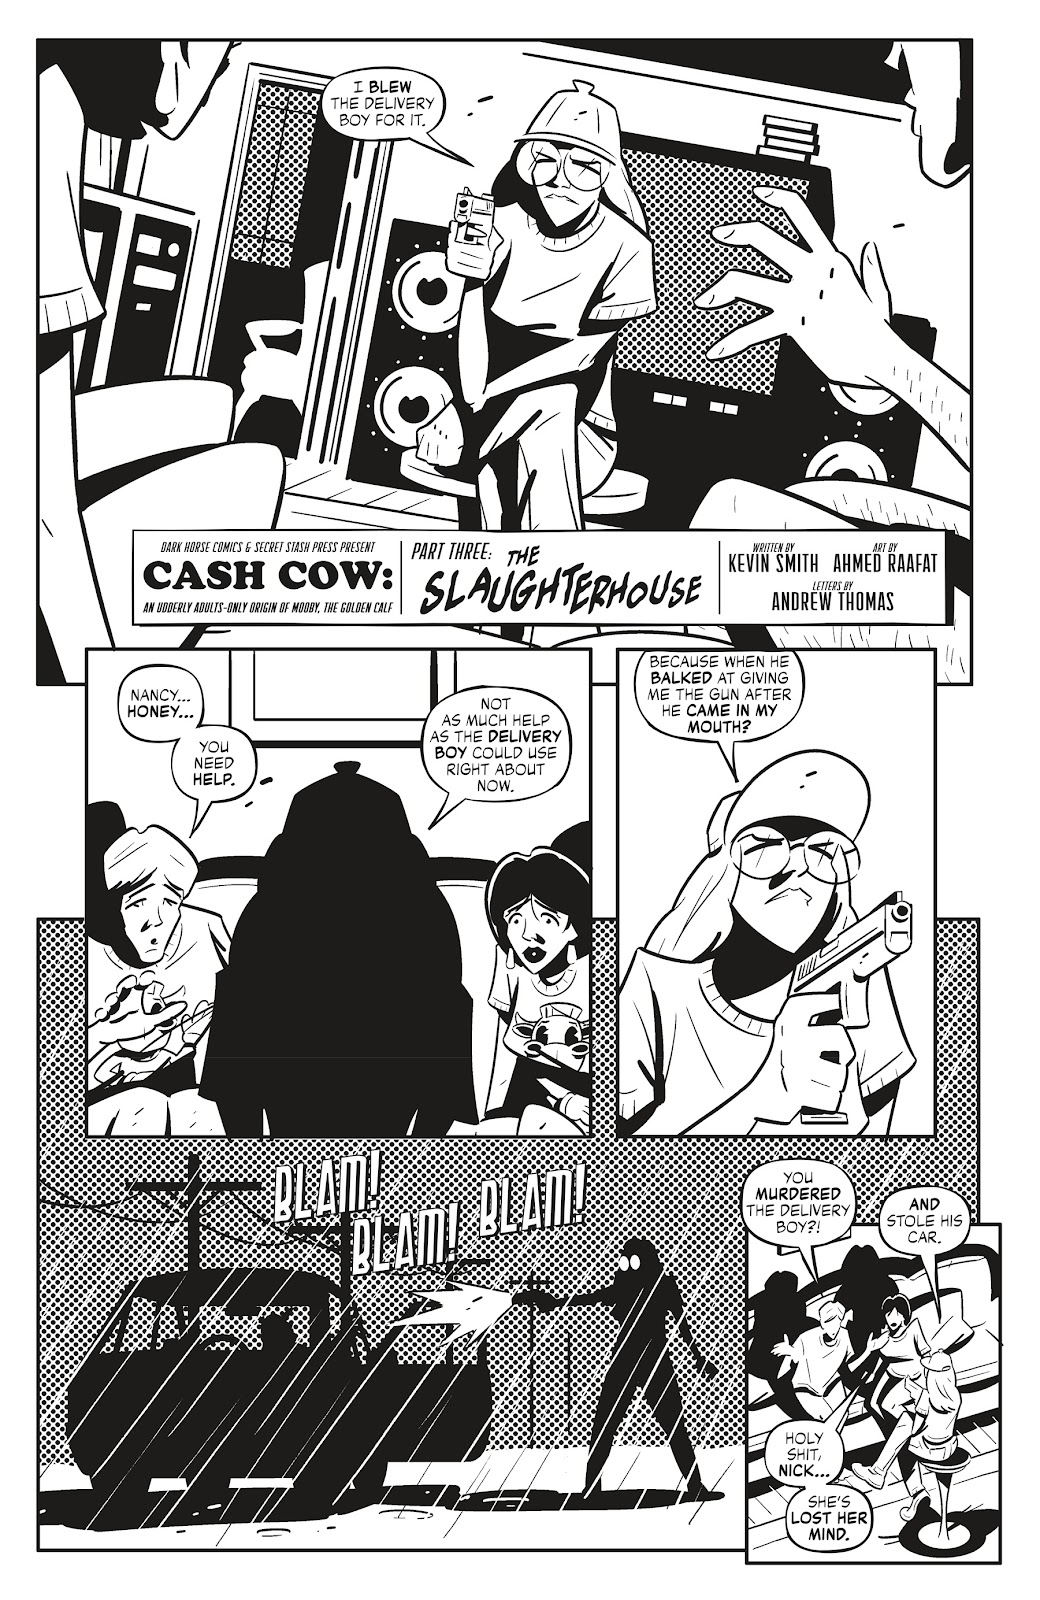 Quick Stops Vol. 2 issue 3 - Page 4